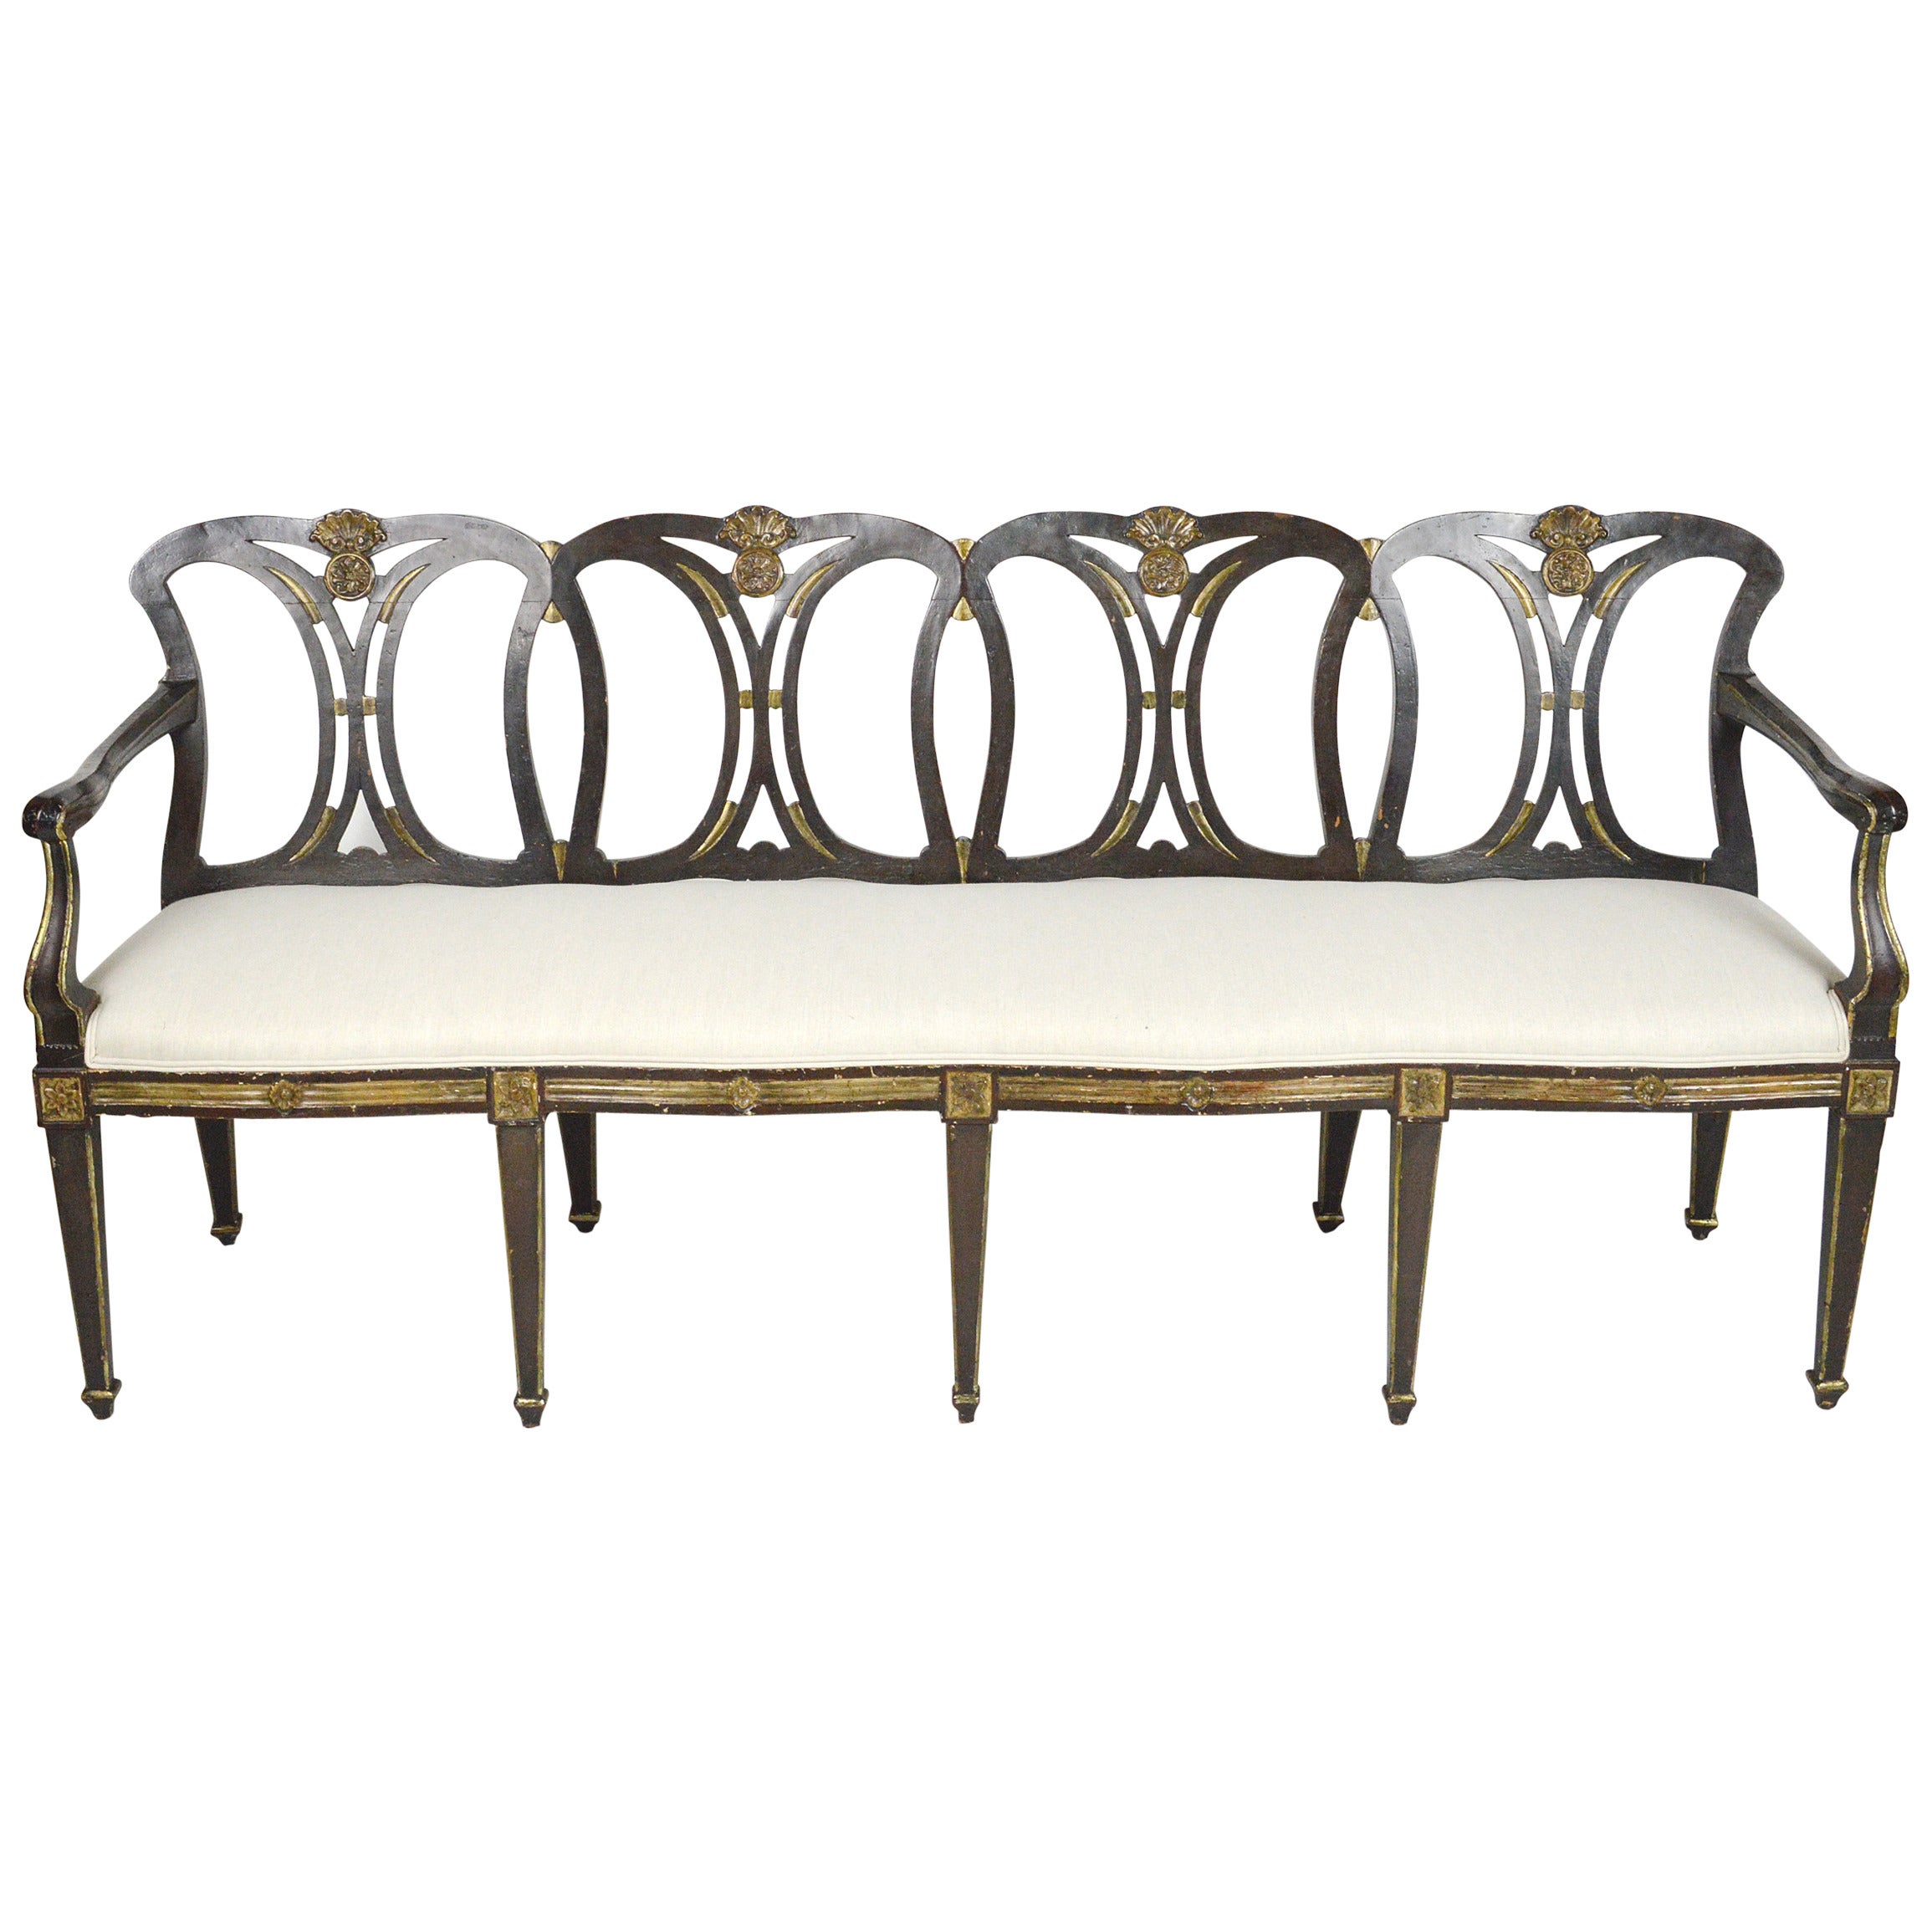 19th Century Italian Neoclassical Style Black Painted and Parcel-Gilt Bench For Sale